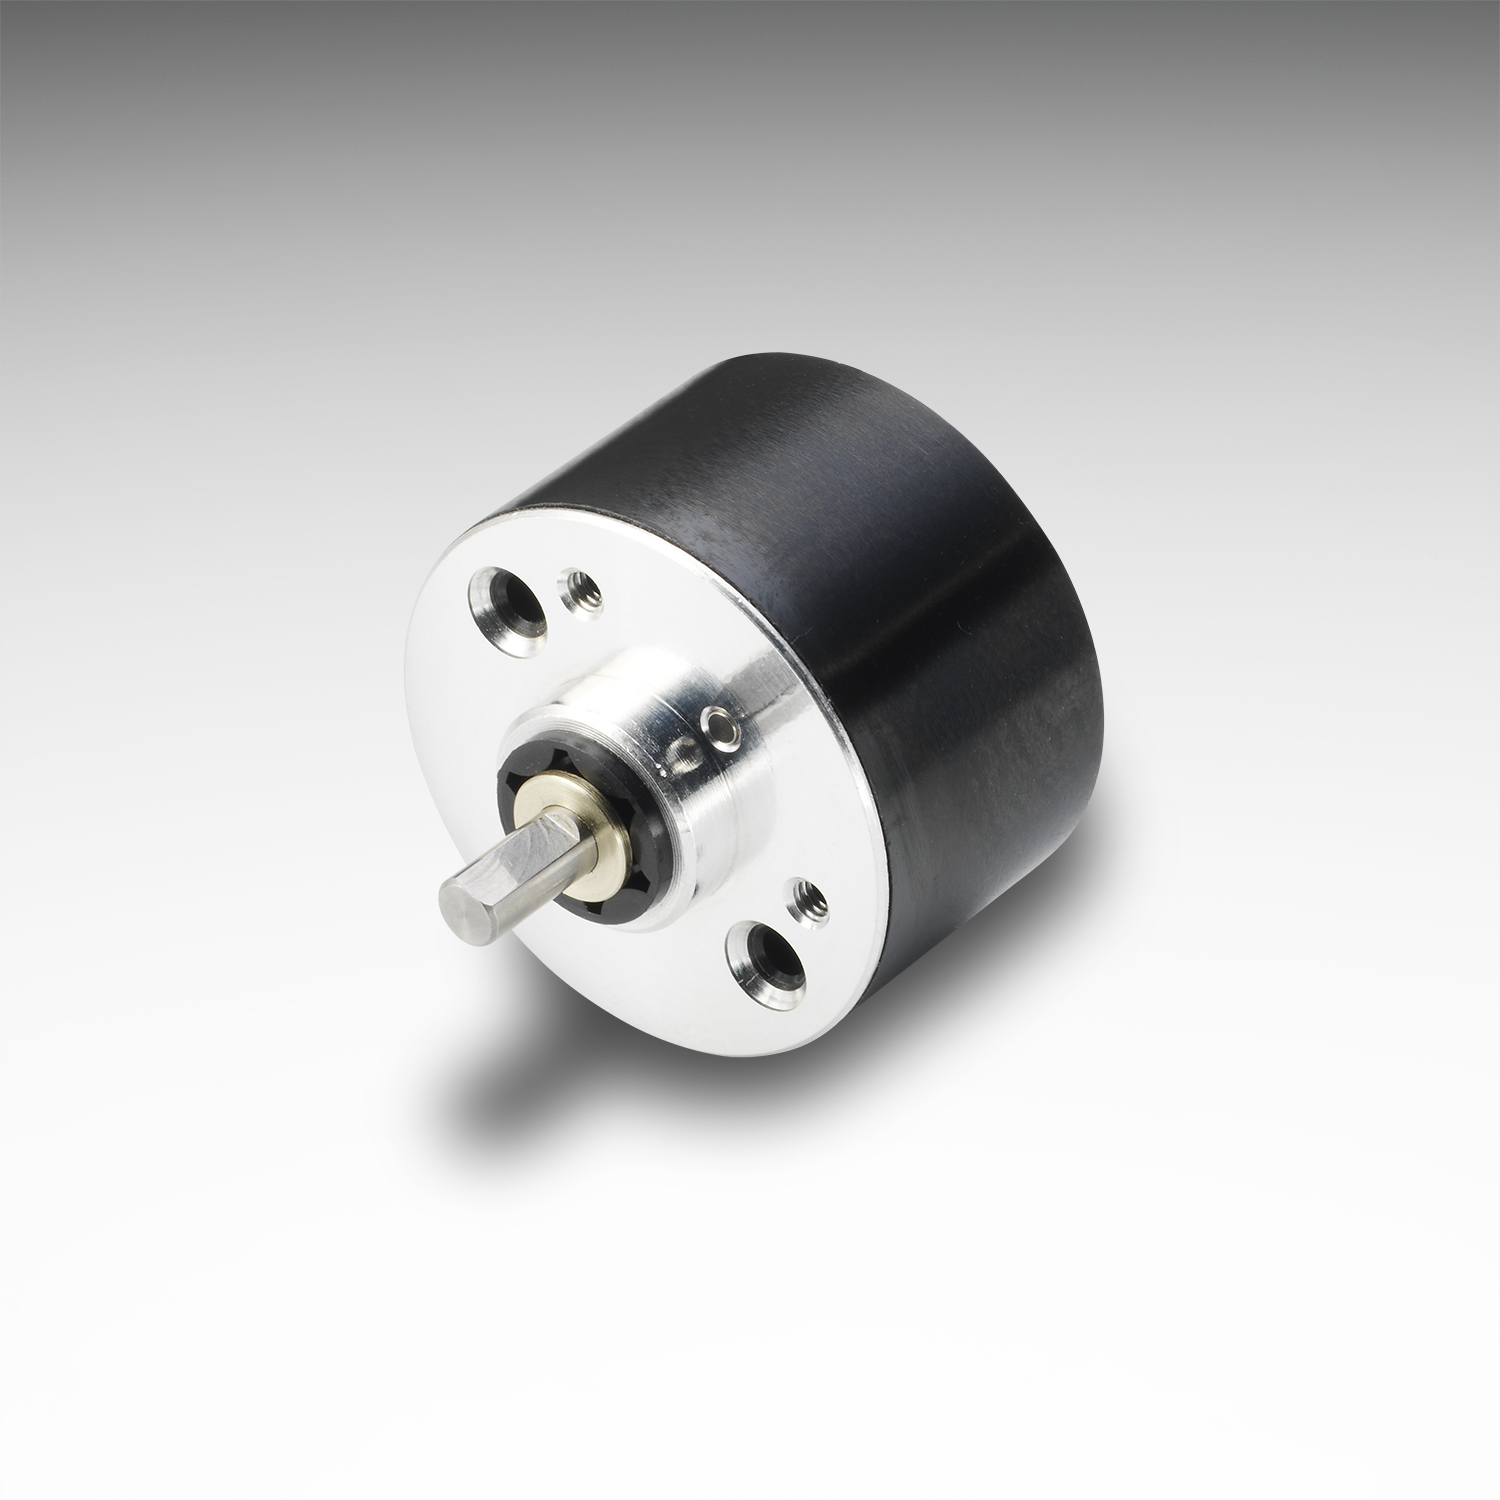 Portescap engineers recommended the Athlonix™ 22N brush DC motor with the F16 magnetic encoder and K24 gearhead, combined with the required mechanical customisation